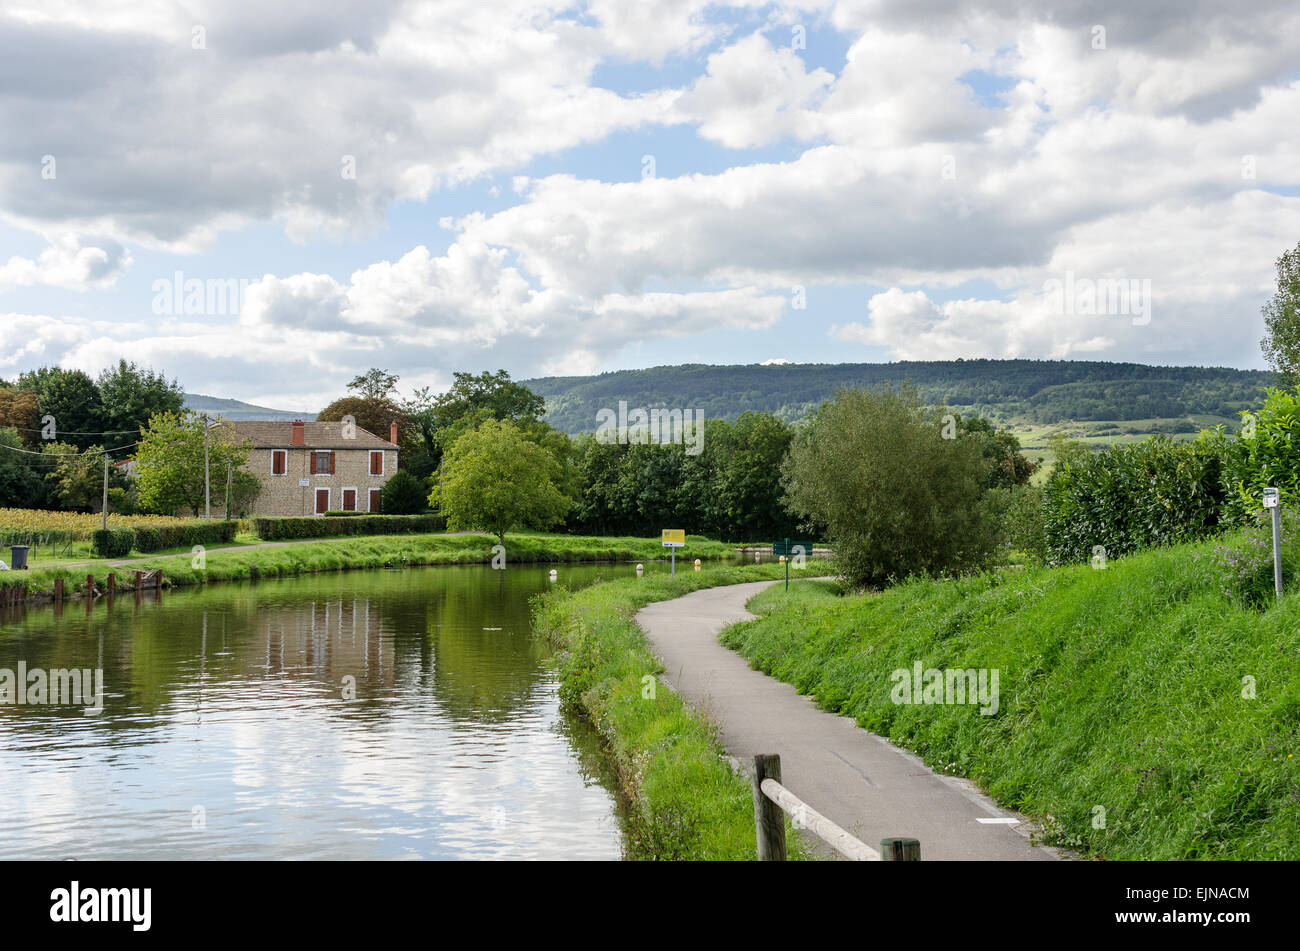 The Canal du Centre curves gracefully through the Burgundian countryside in the village of Remigny, Burgundy, France. Stock Photo